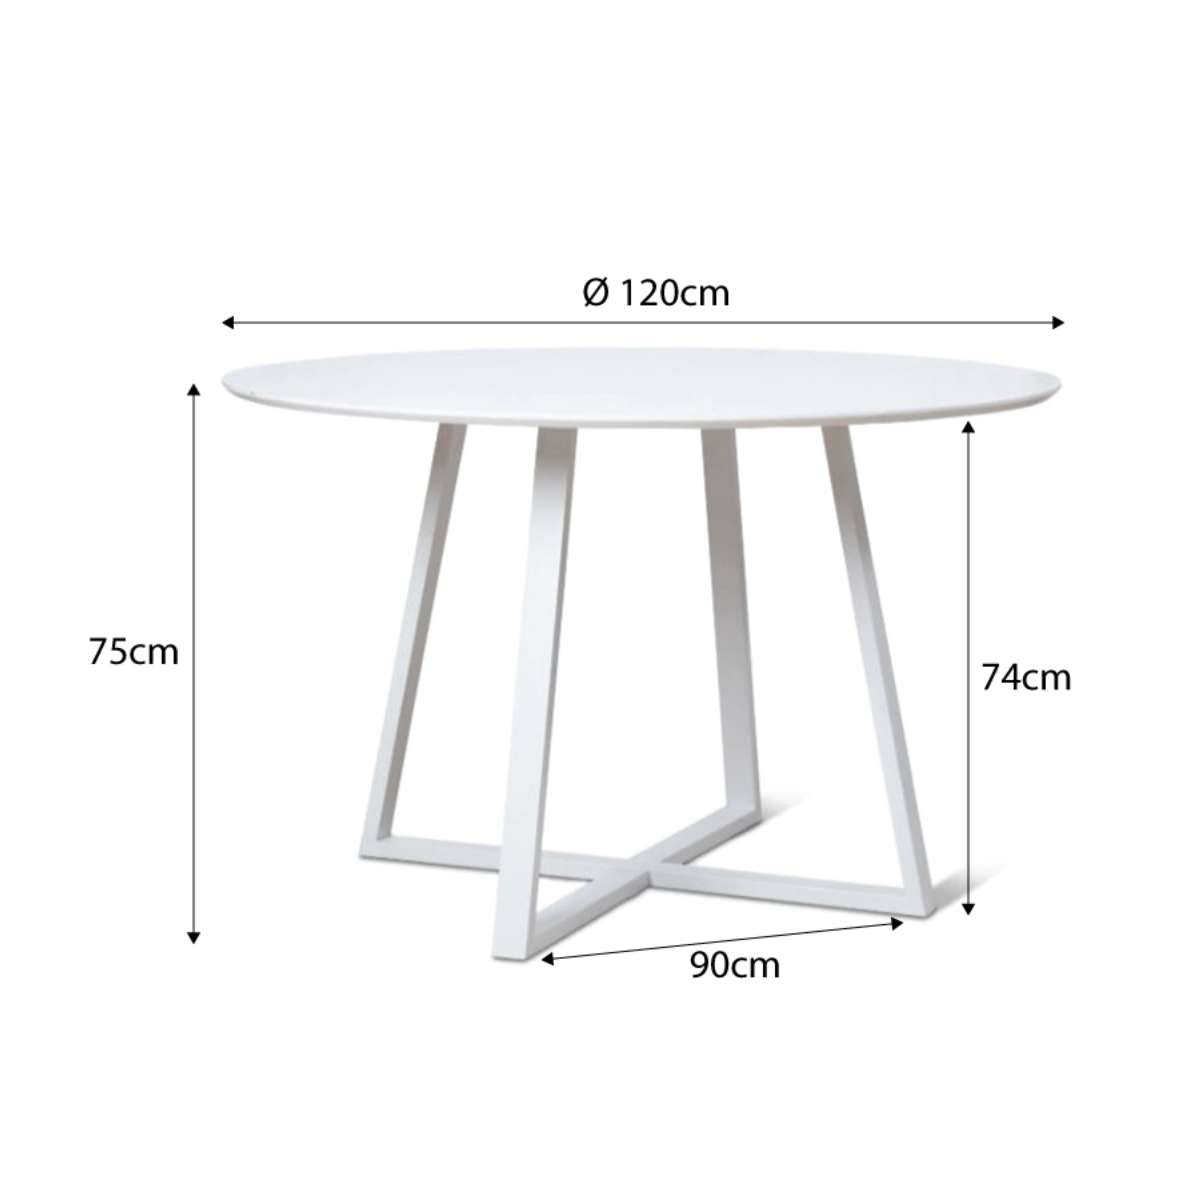 Zander 4 Seater Round Dining Table - White